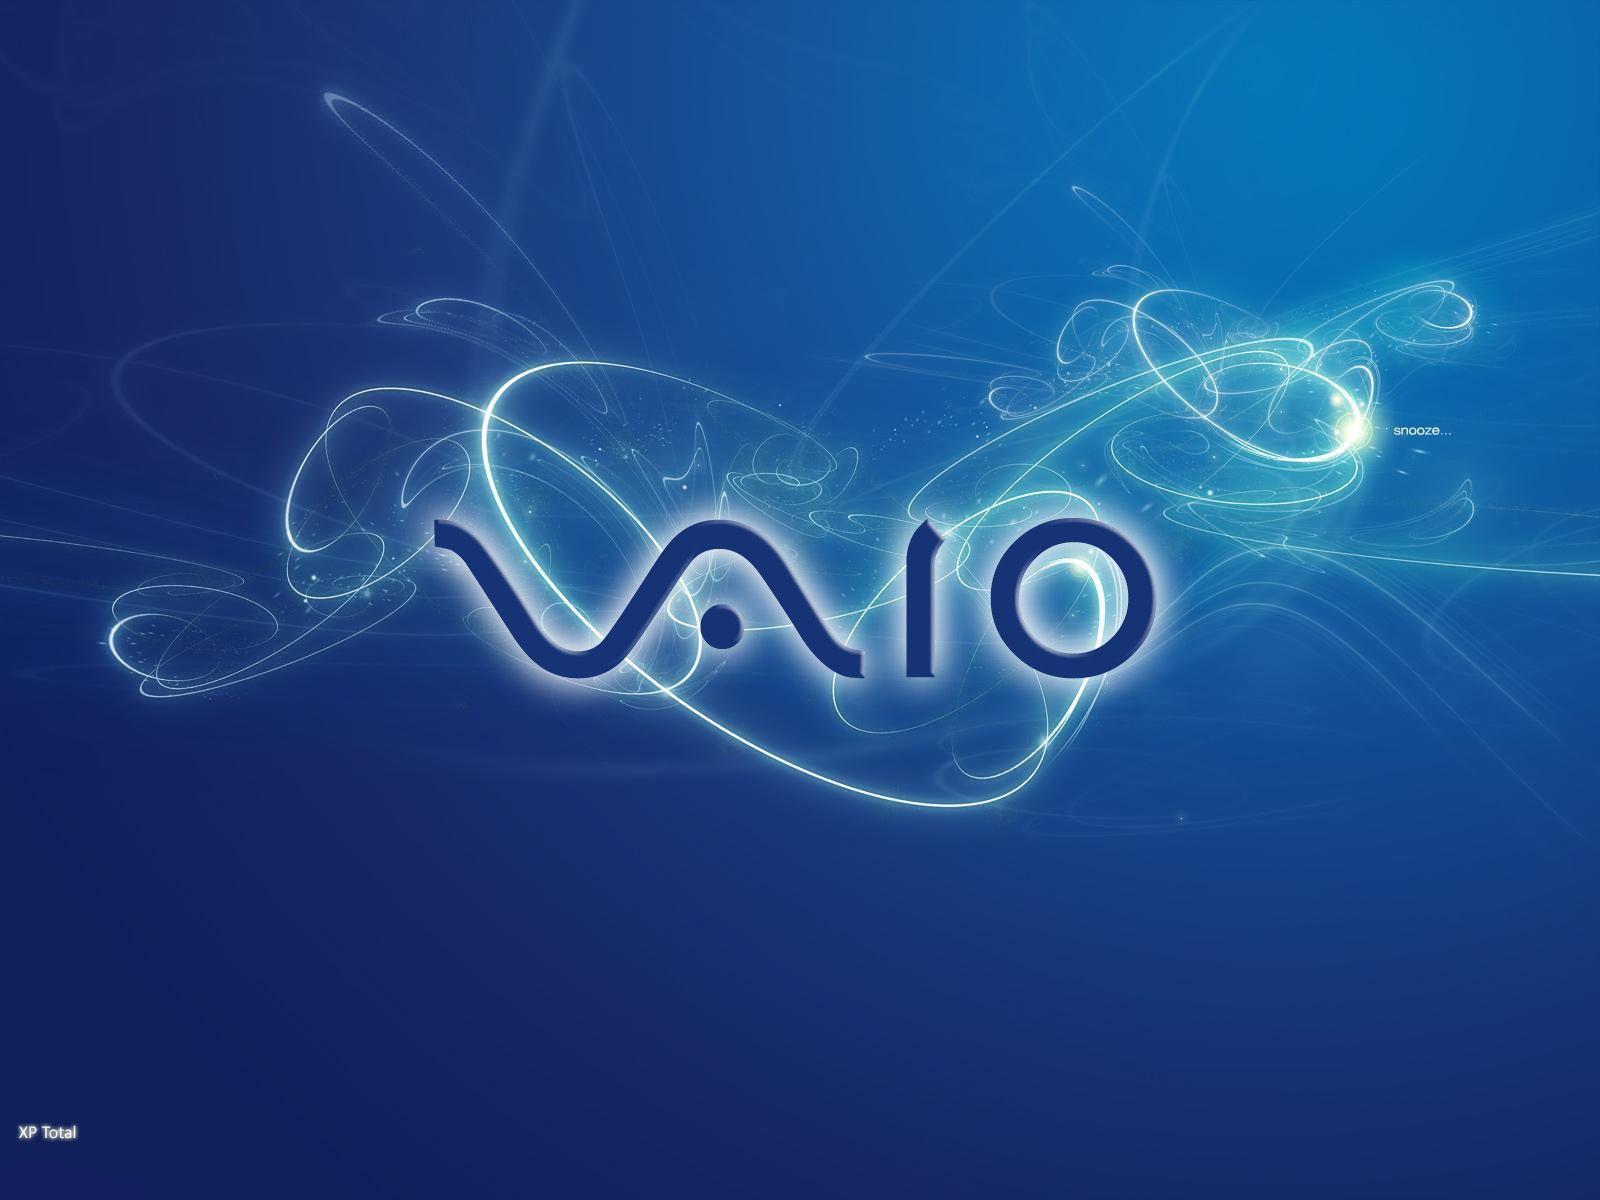 Wallpaper Sony Vaio 1600x1200PX Official Sony Vaio Wallpaper